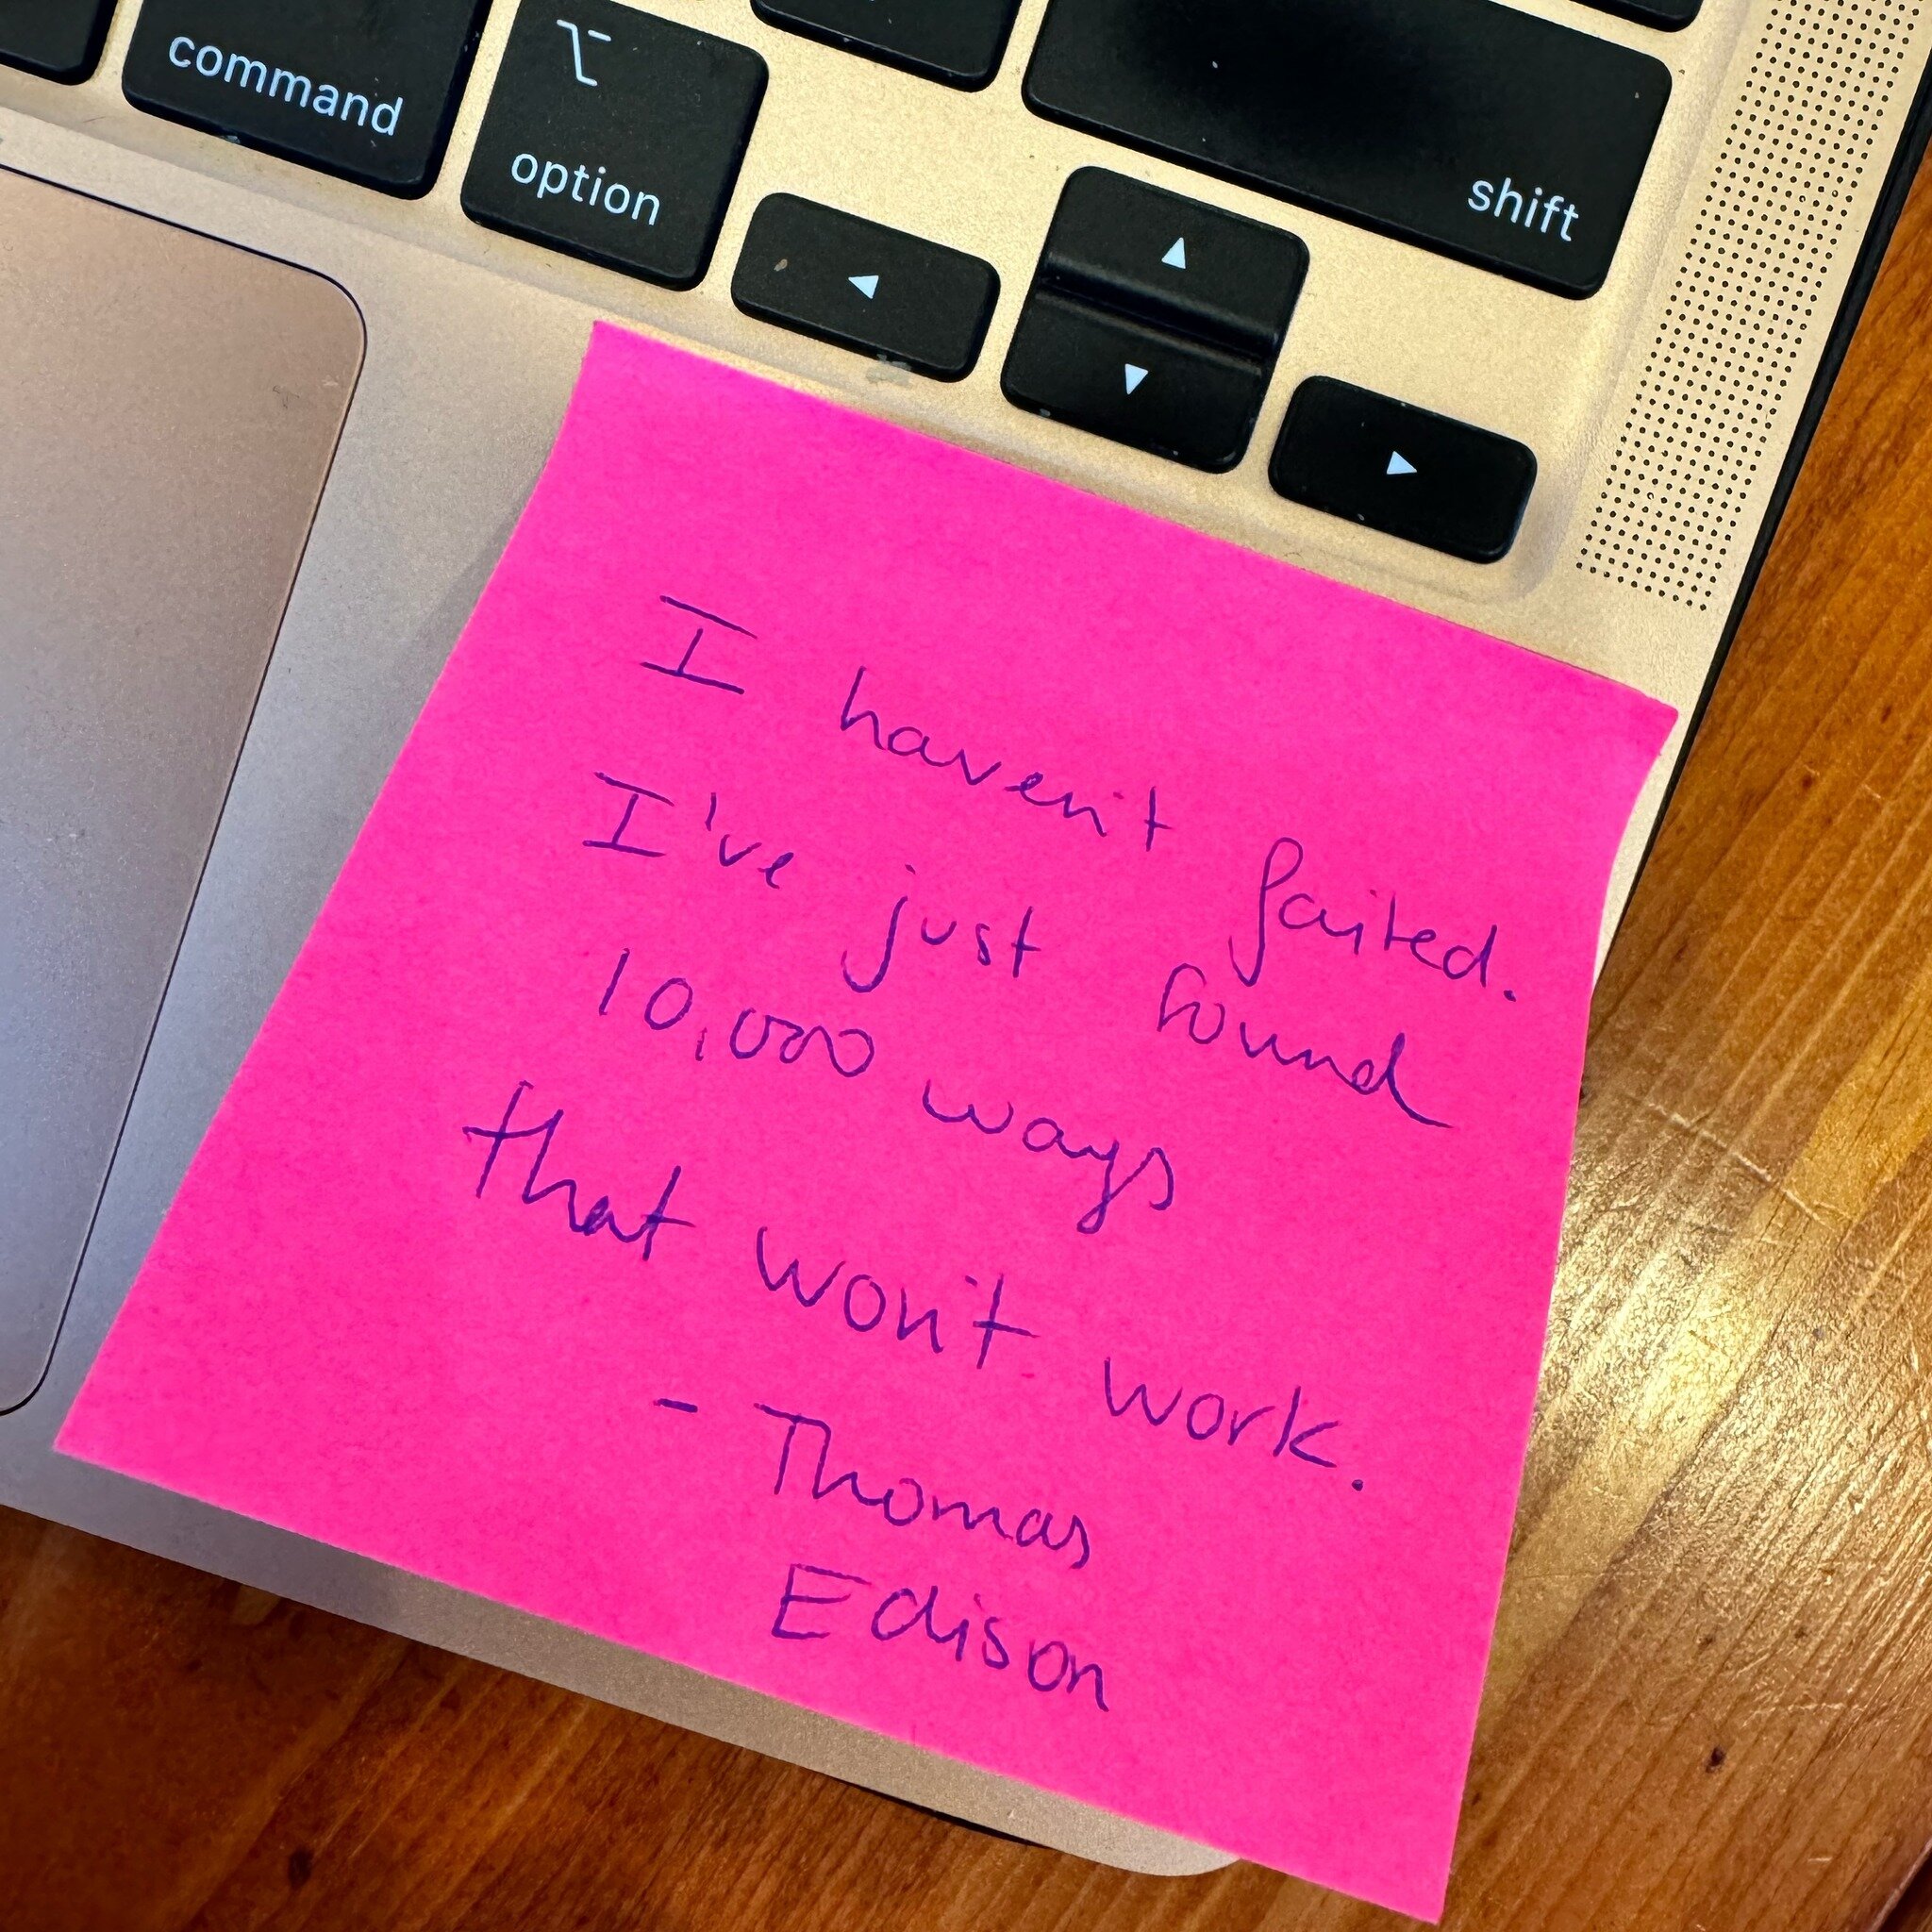 As seen on my laptop. Do post-it notes also work for you? I keep them everywhere and are a staple in my systems.
.
.
#strategy #adhd #reminder